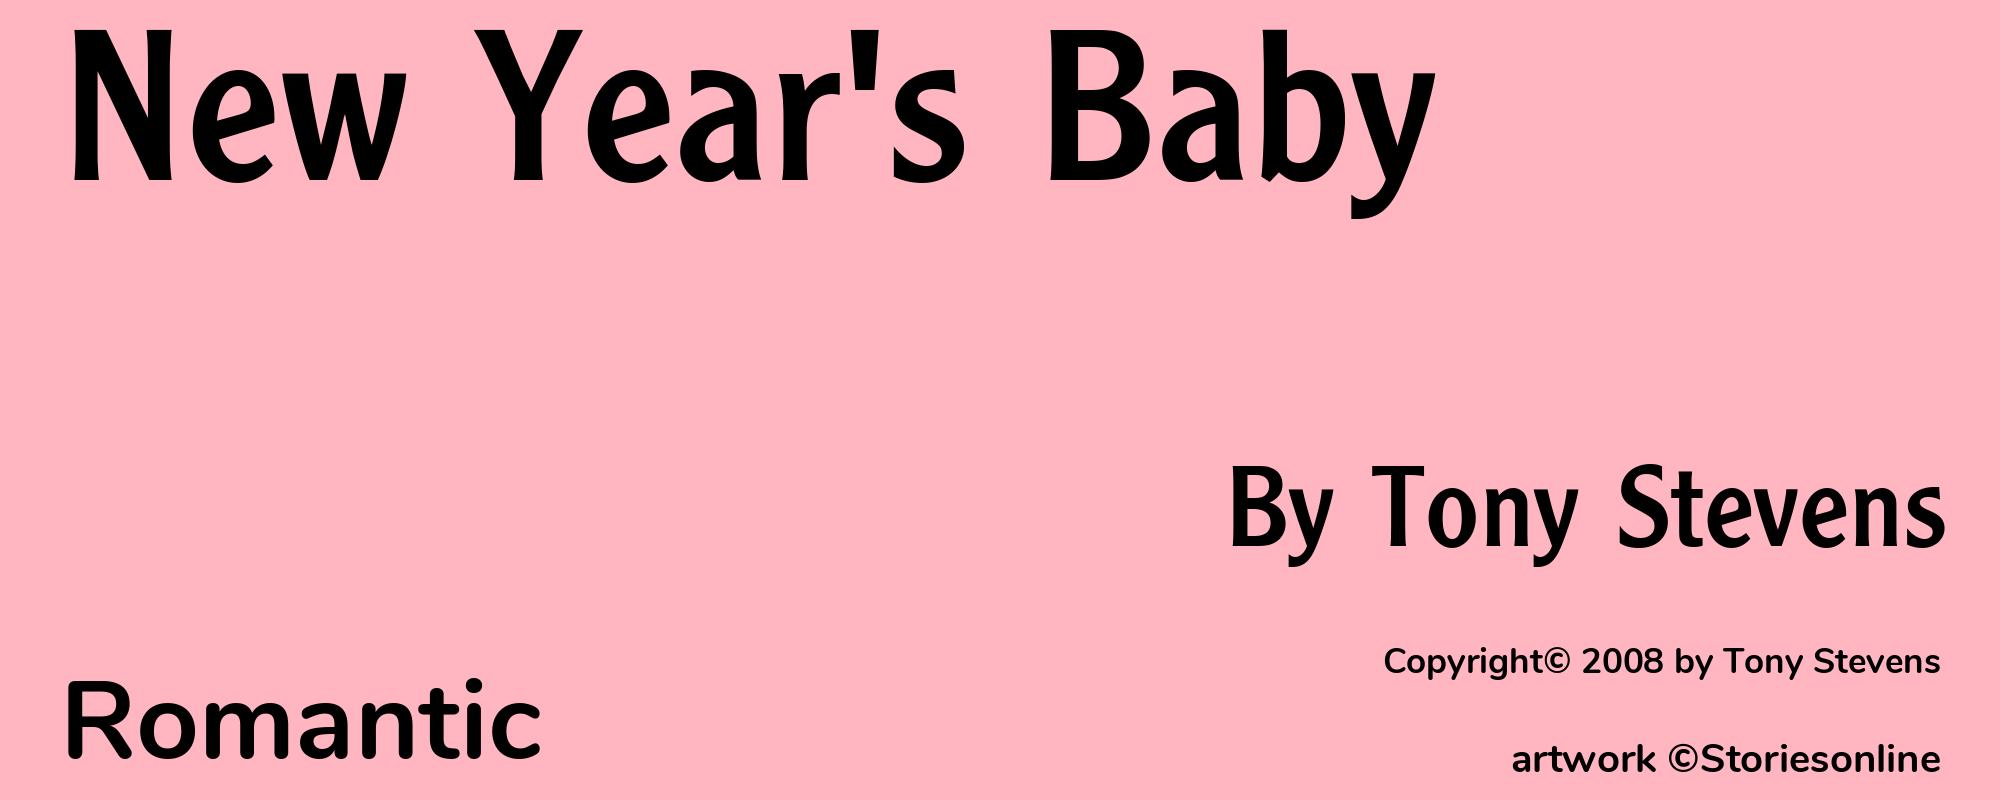 New Year's Baby - Cover